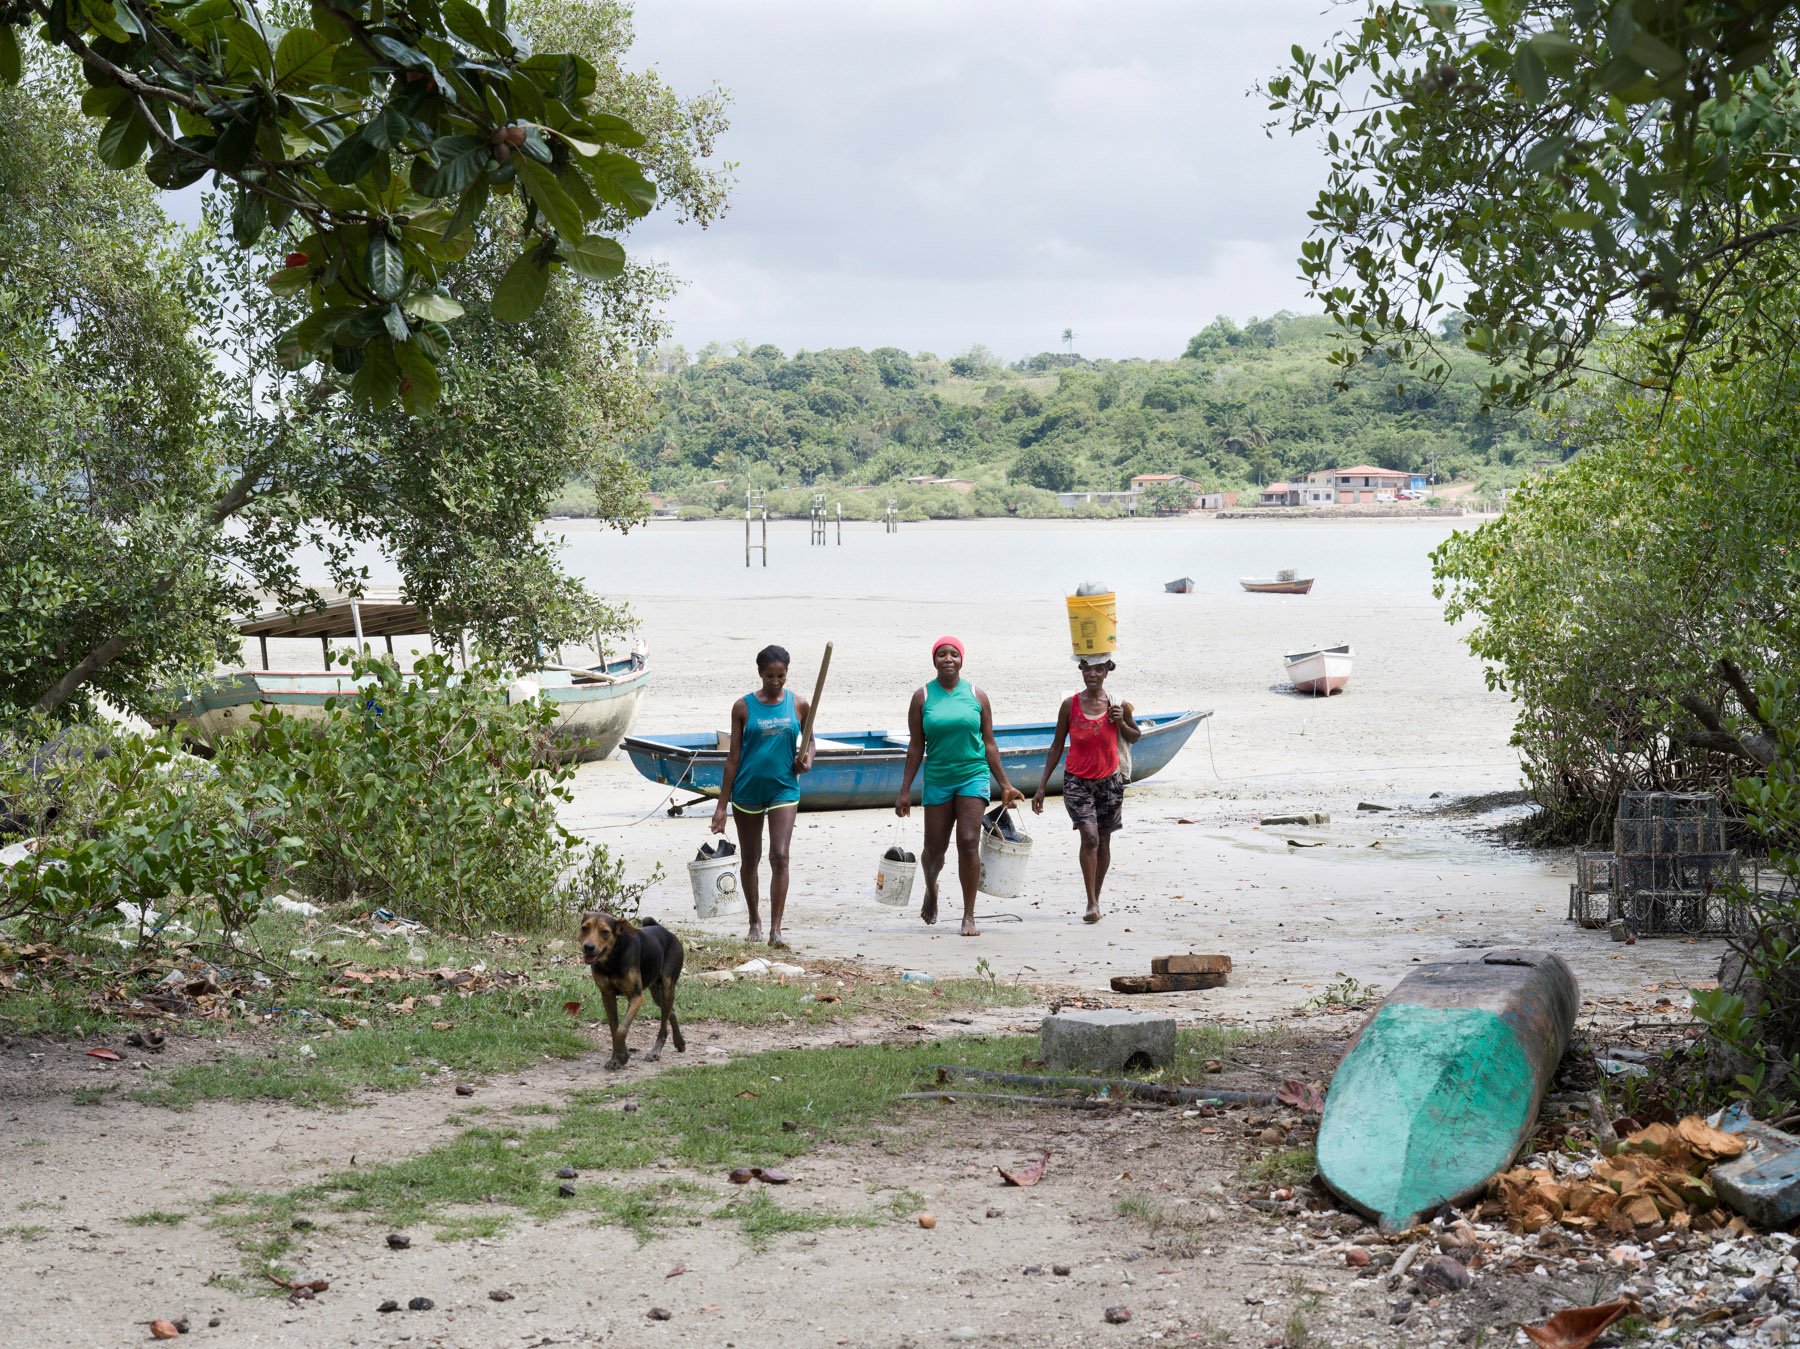  Ilha Da Maré, Bahia, 2021. Shellfish catchers coming back from the crab hunting in the mangrove fields surrounding the island. The Bahia’s researcher Neuza Miranda carried on a study that demonstrated the high contamination of Cadmium and Lead comin